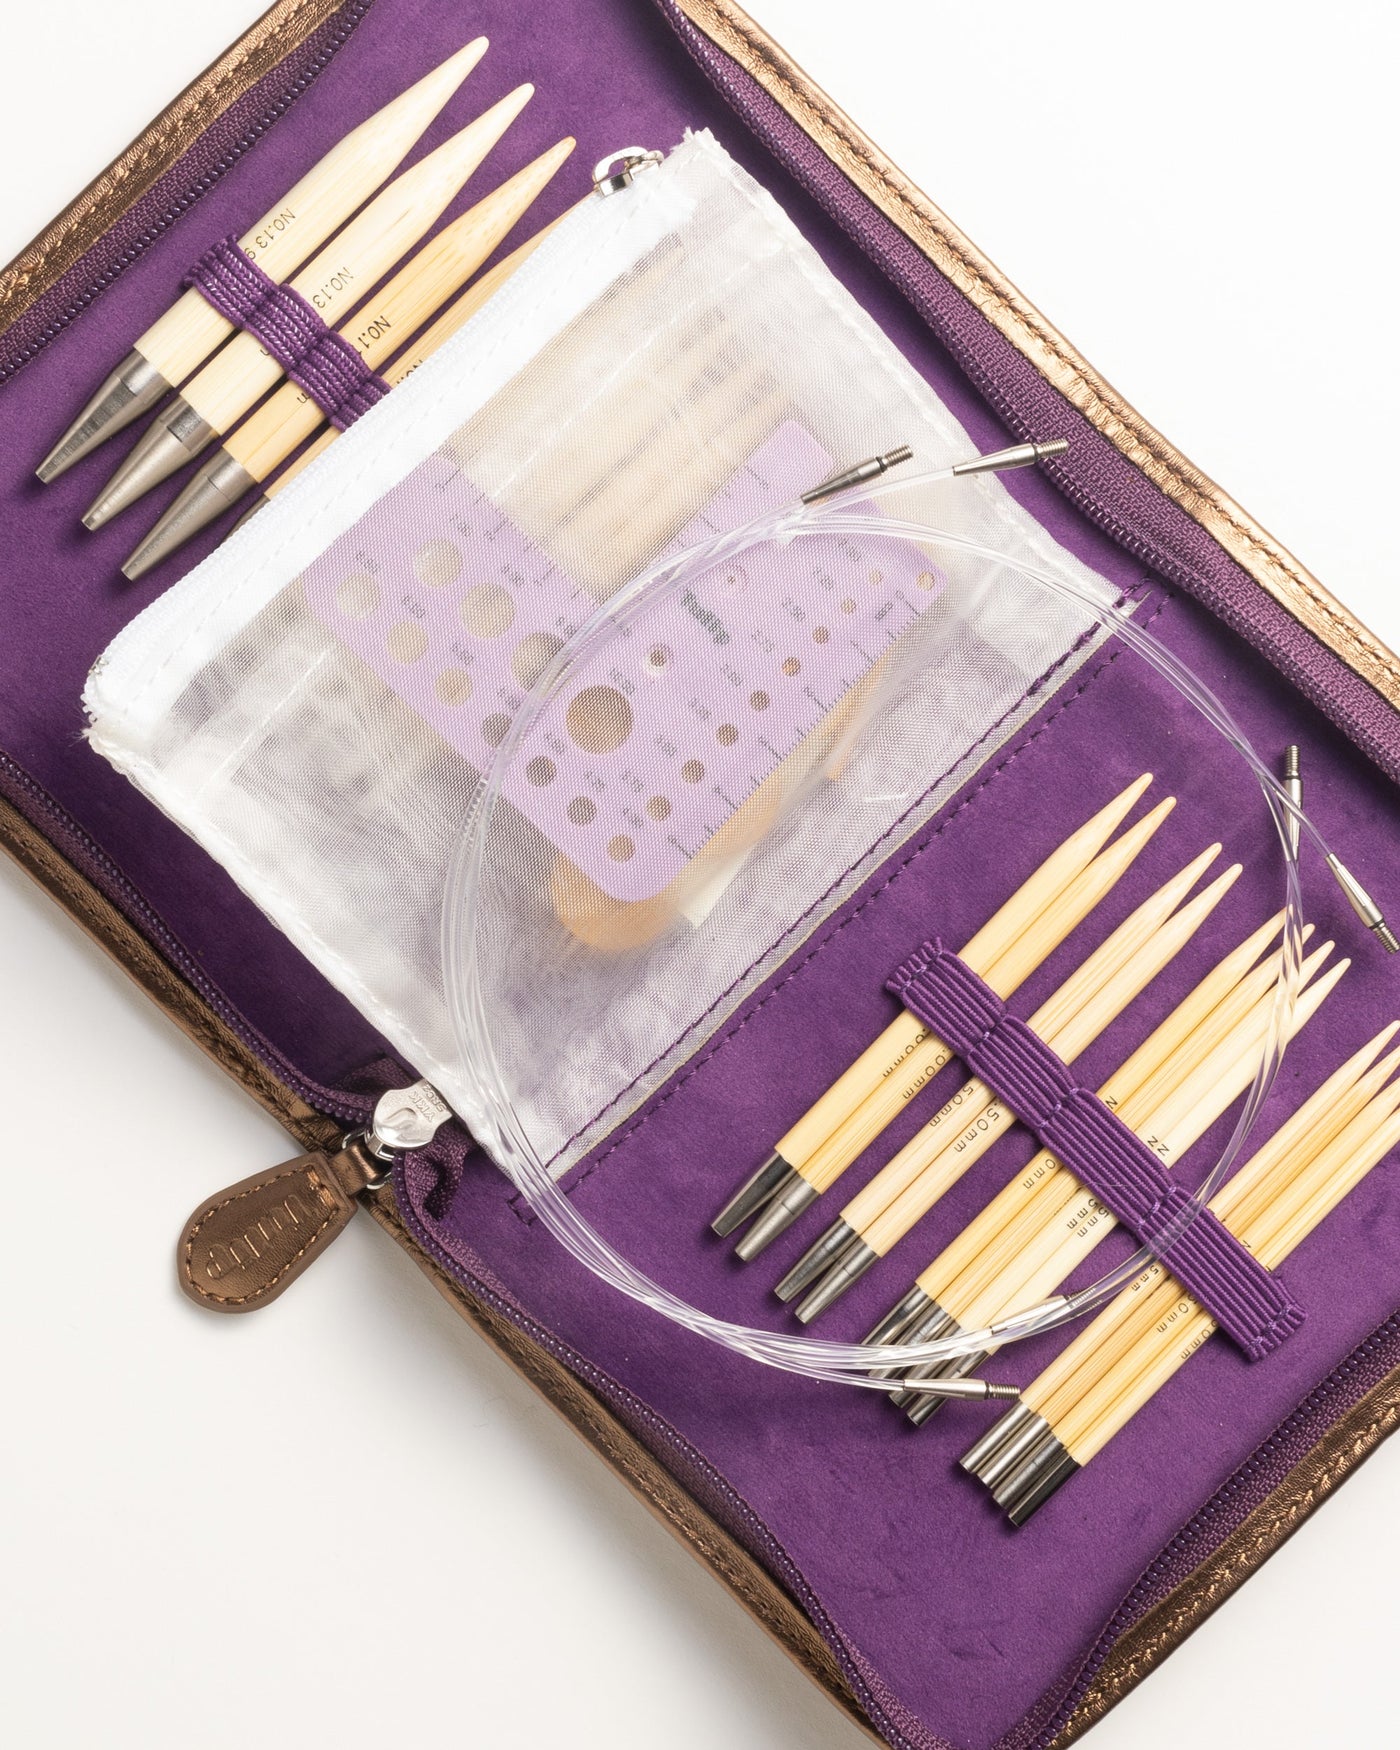 New 2022 ChiaoGoo Knitting Needles Accessories in Stock Now!